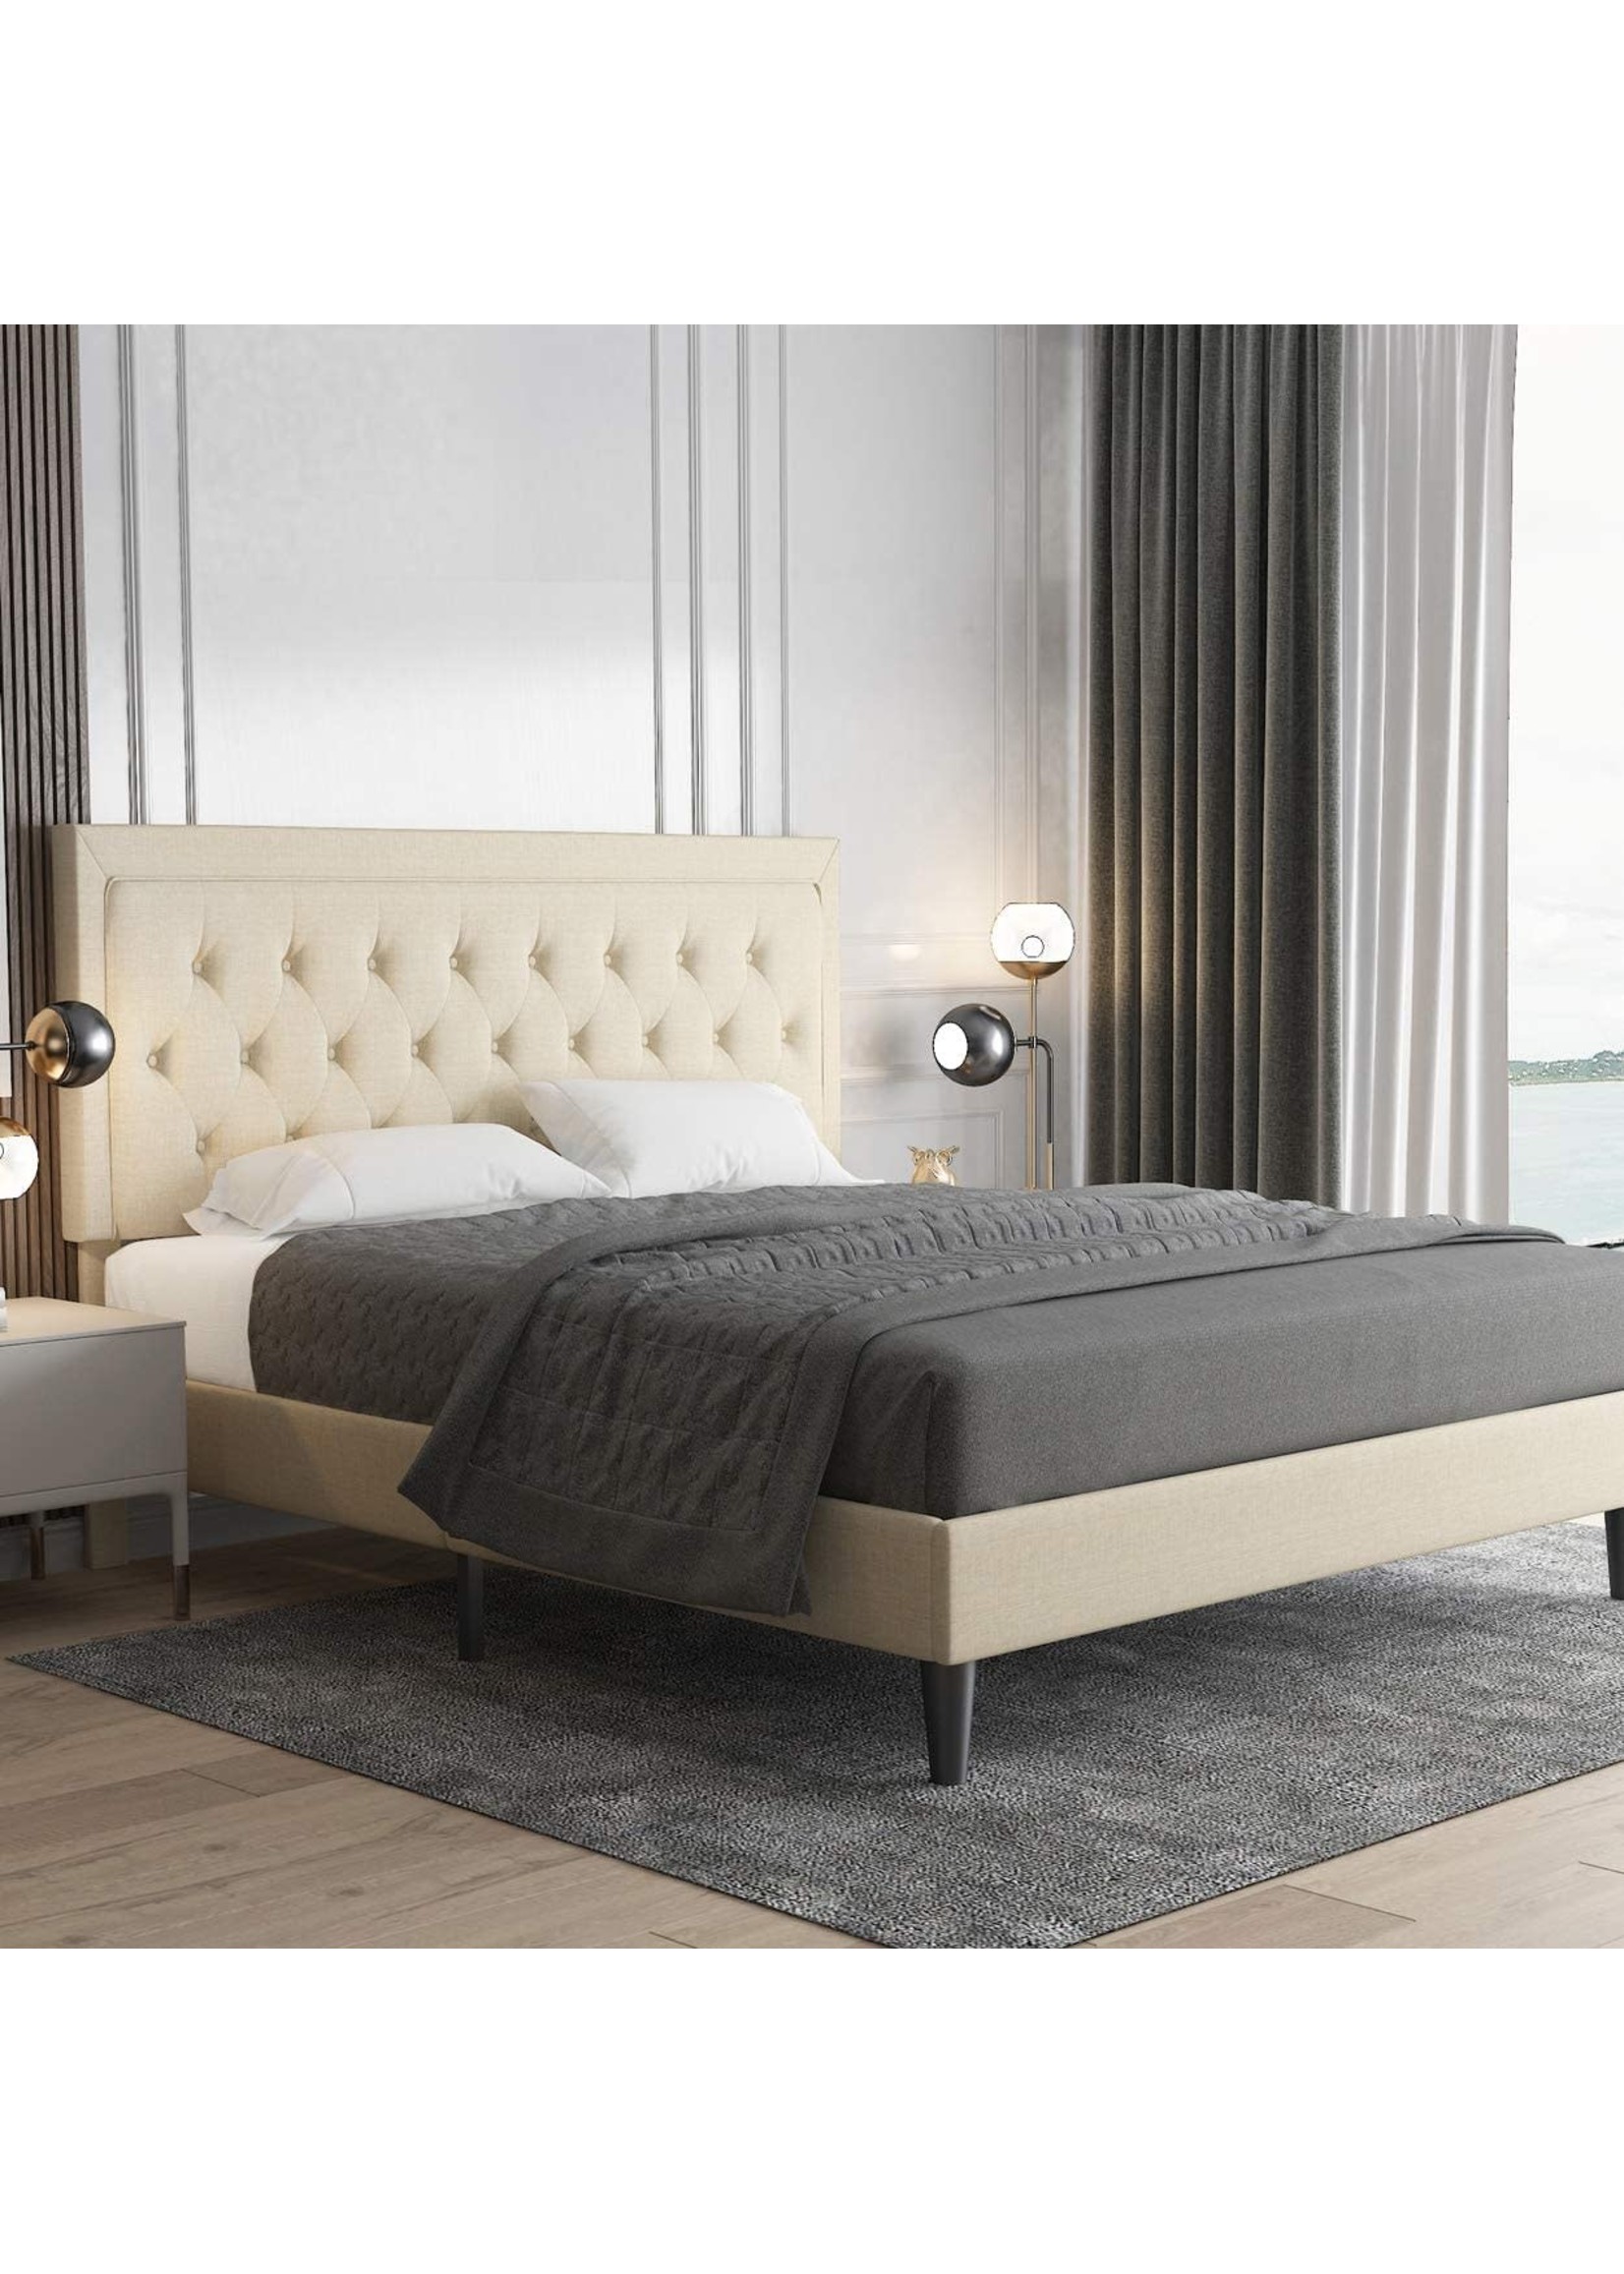 *Like New Allewie King Size Platform Bed Frame/Fabric Upholstered Bed Frame with Diamond Button Tufted Headboard